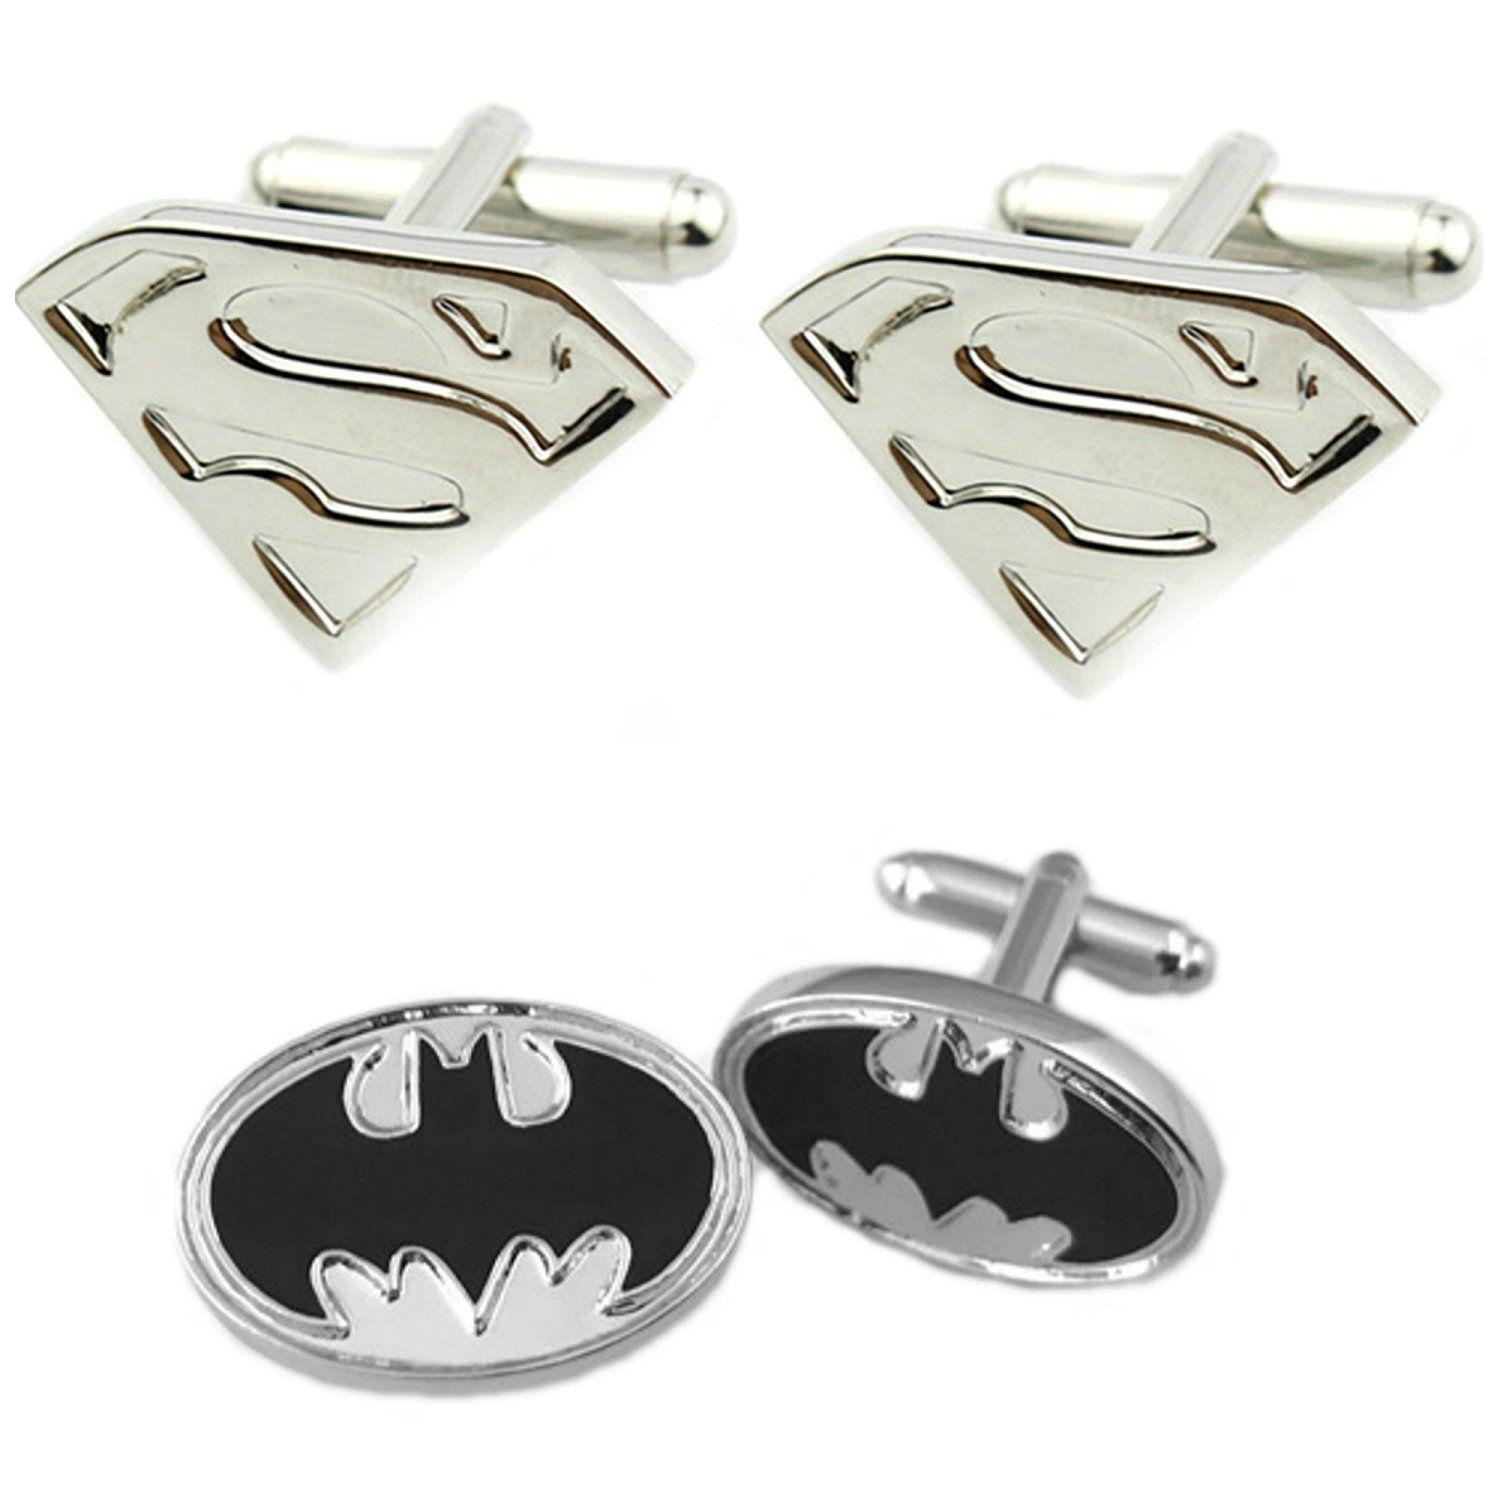 Black and Silver Superman Logo - Cheap Black And Silver Superman Logo, find Black And Silver Superman ...